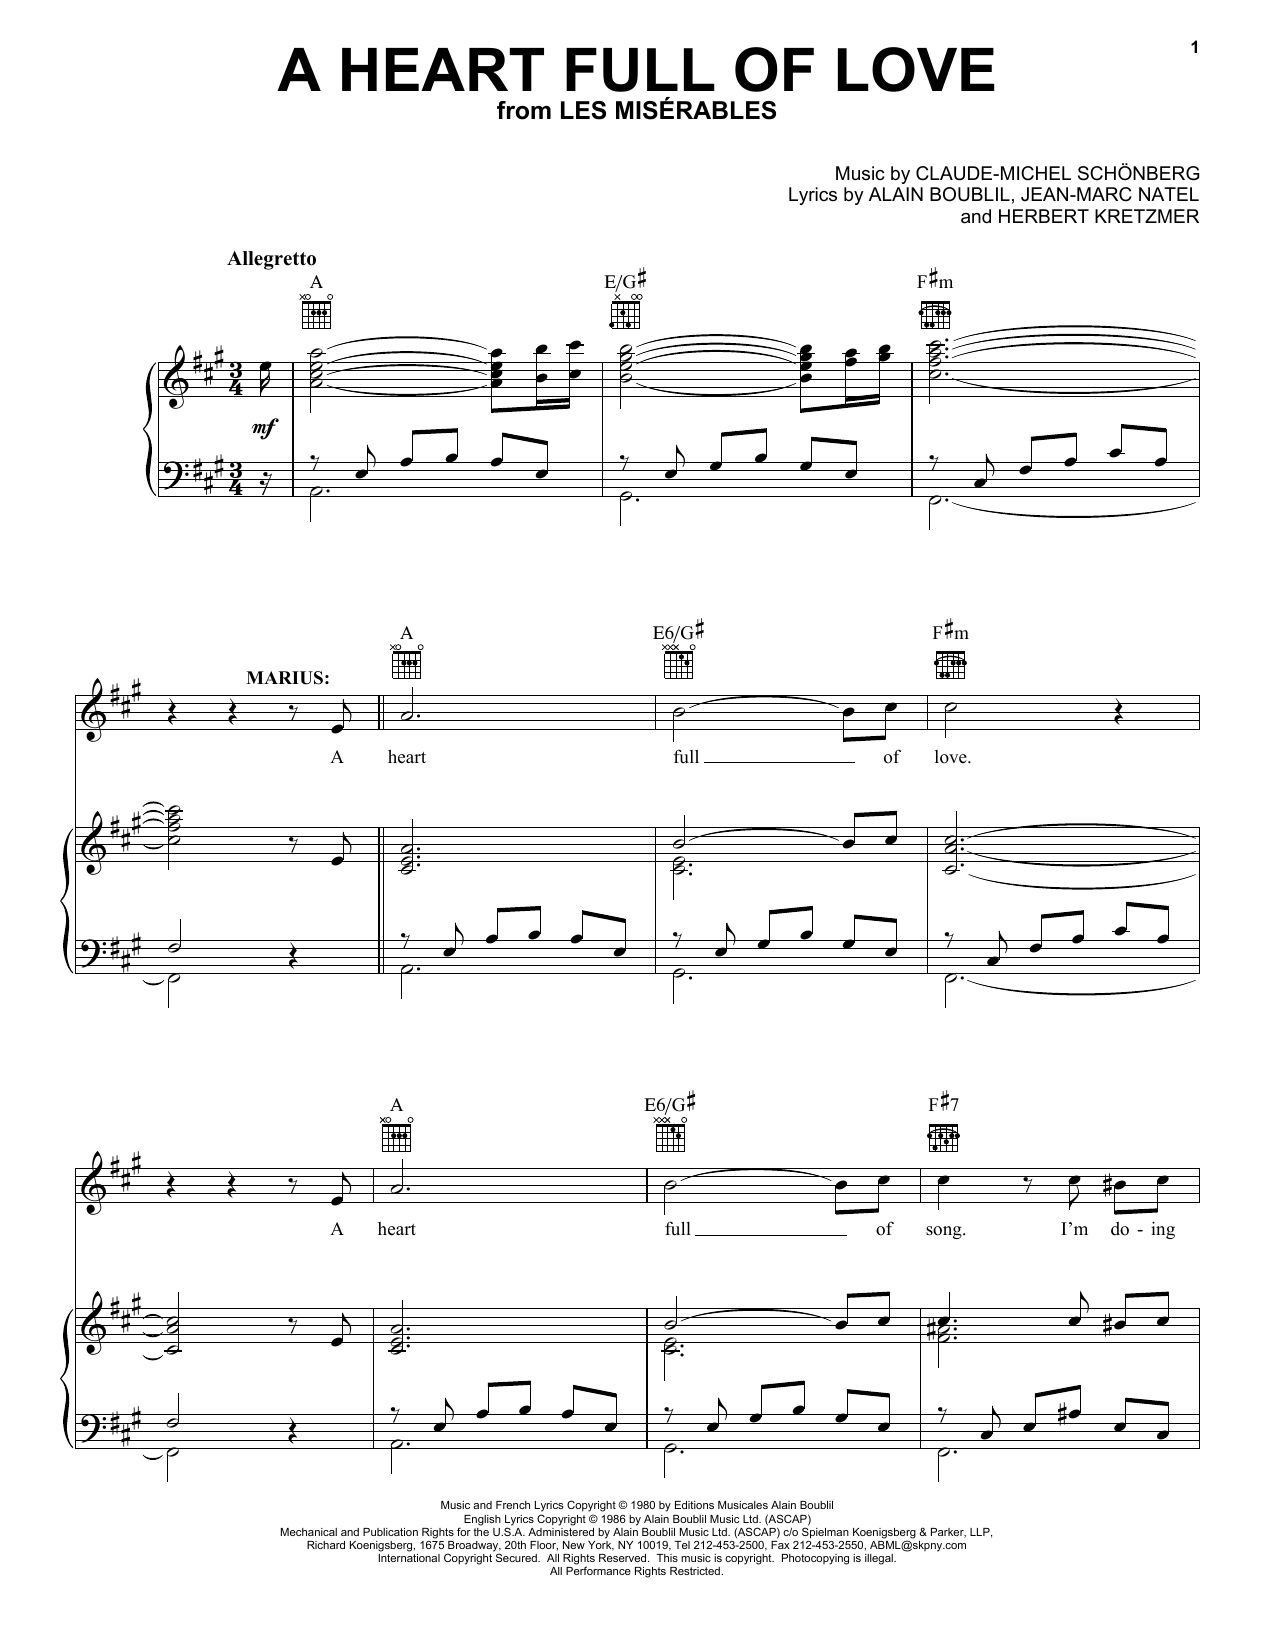 Alain Boublil A Heart Full Of Love sheet music notes and chords. Download Printable PDF.